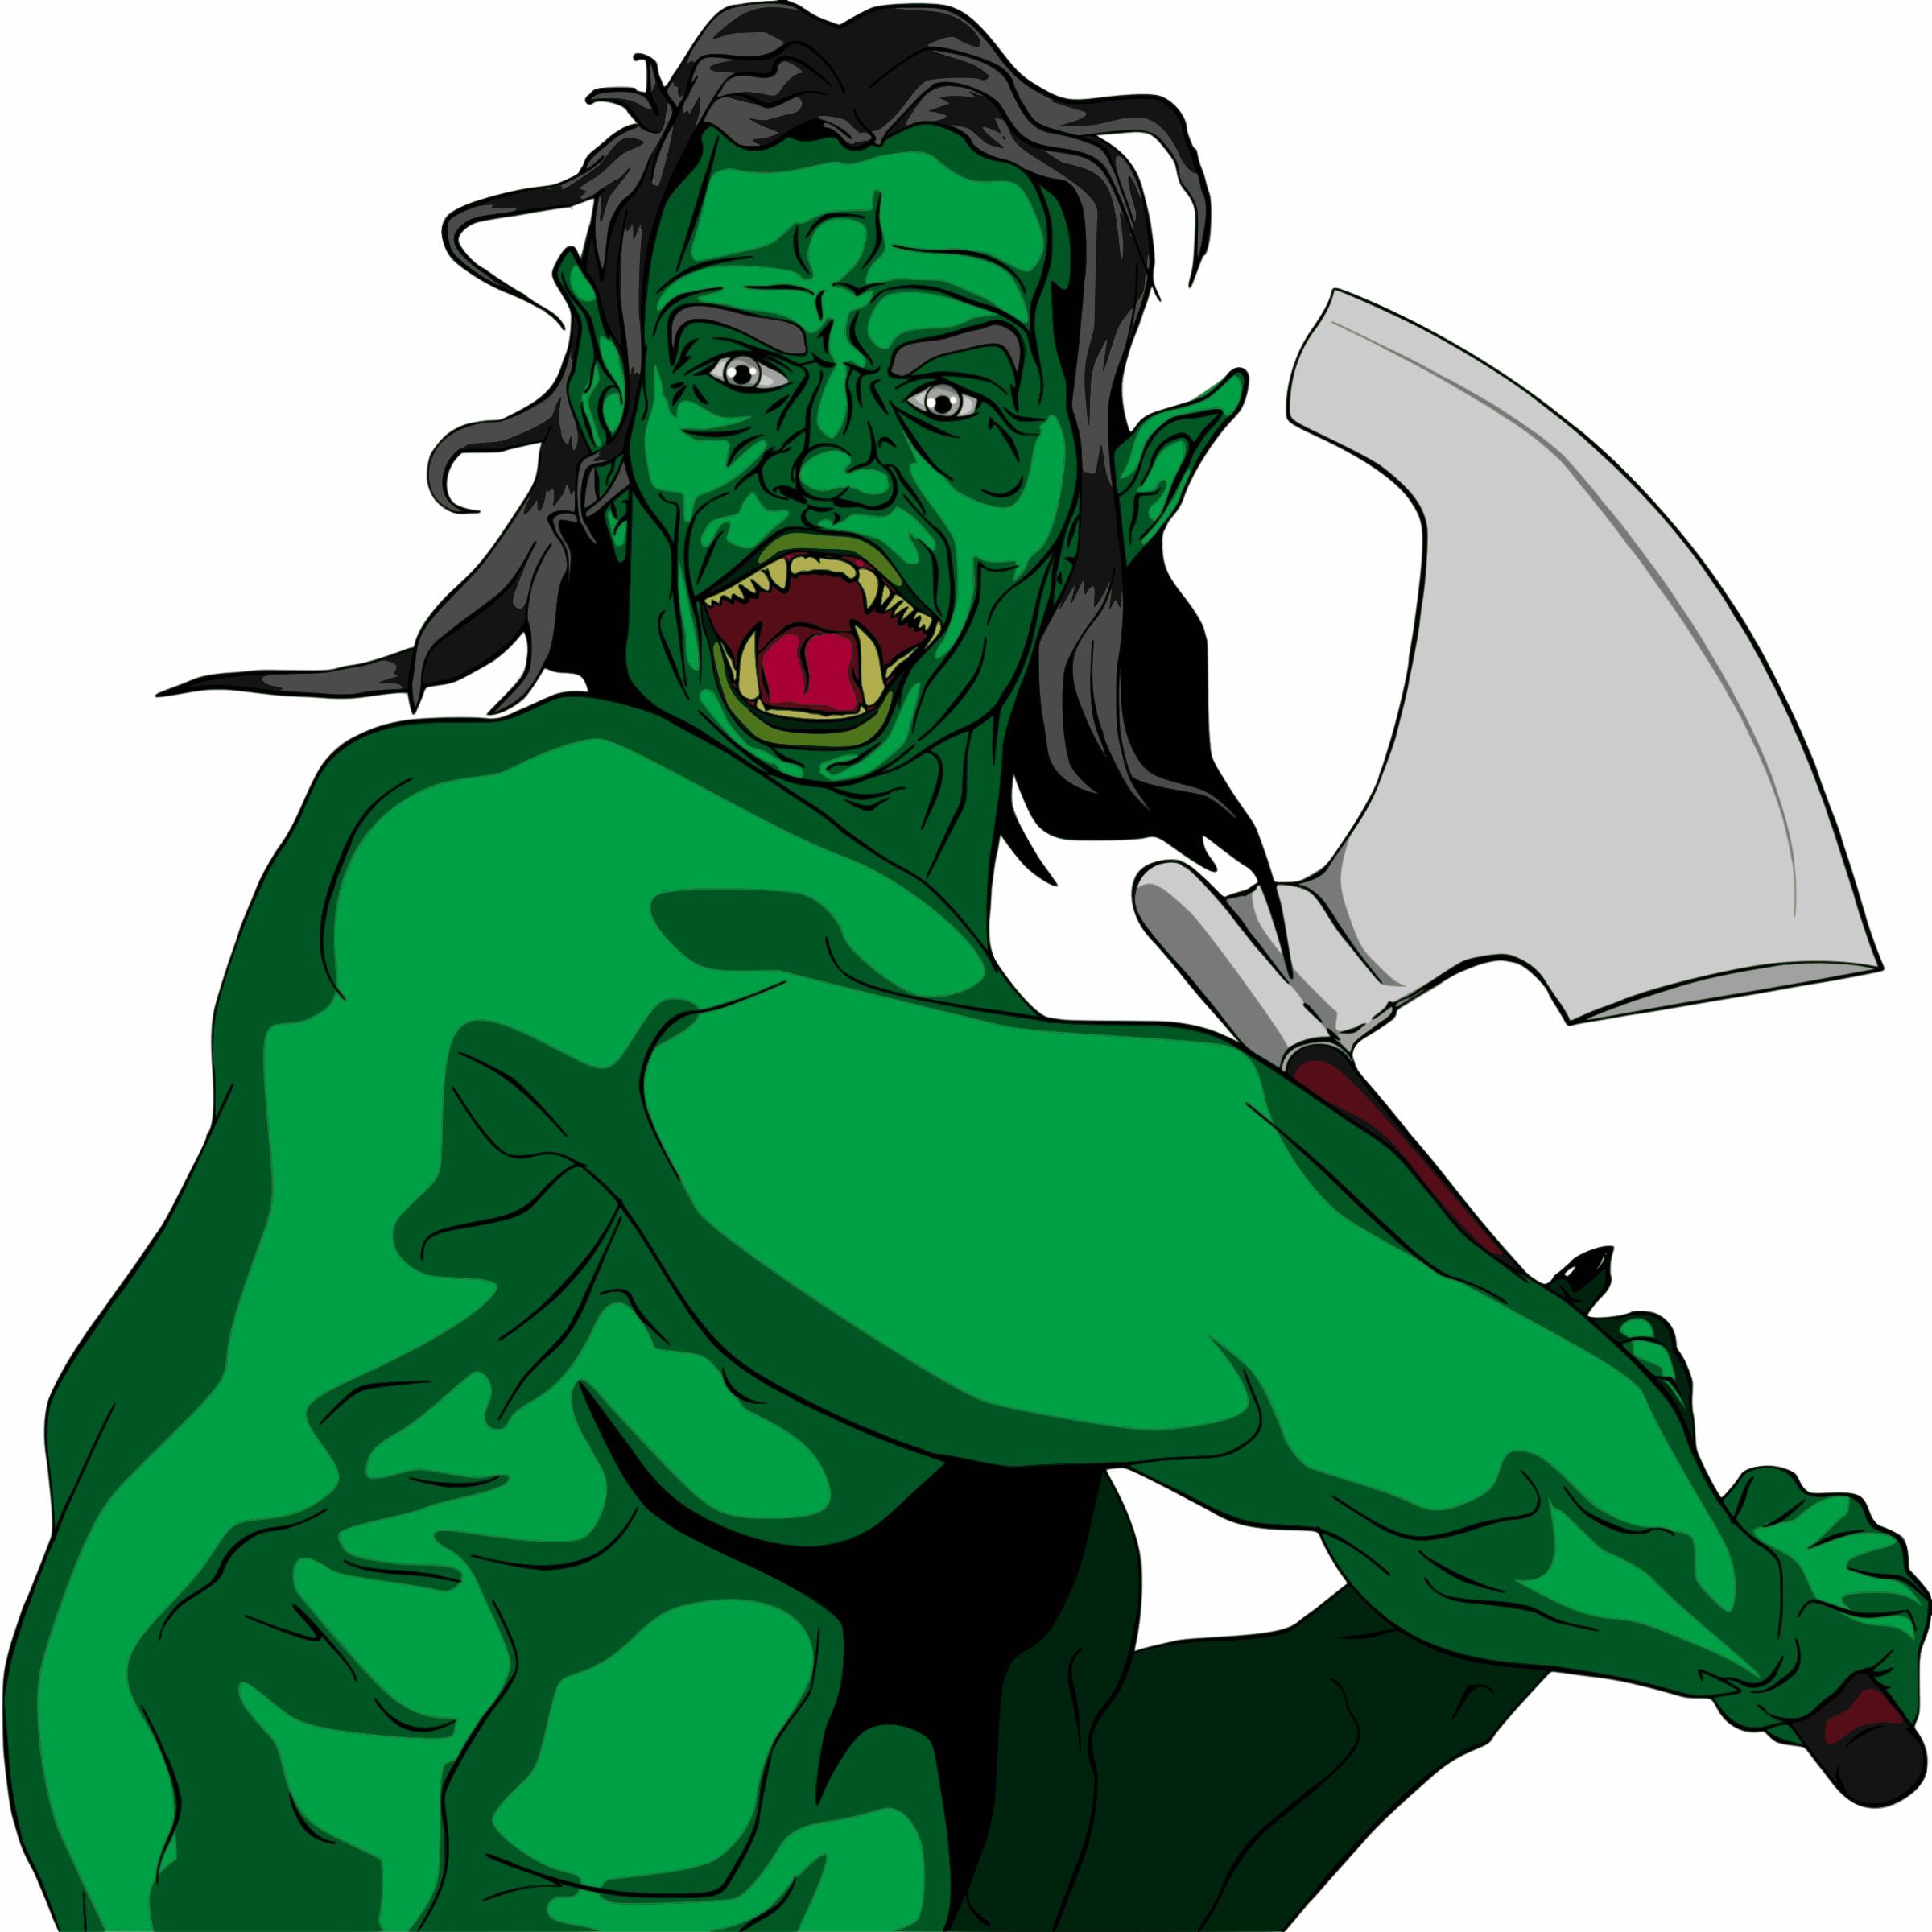 Fantasy Orc Swinging Axe png